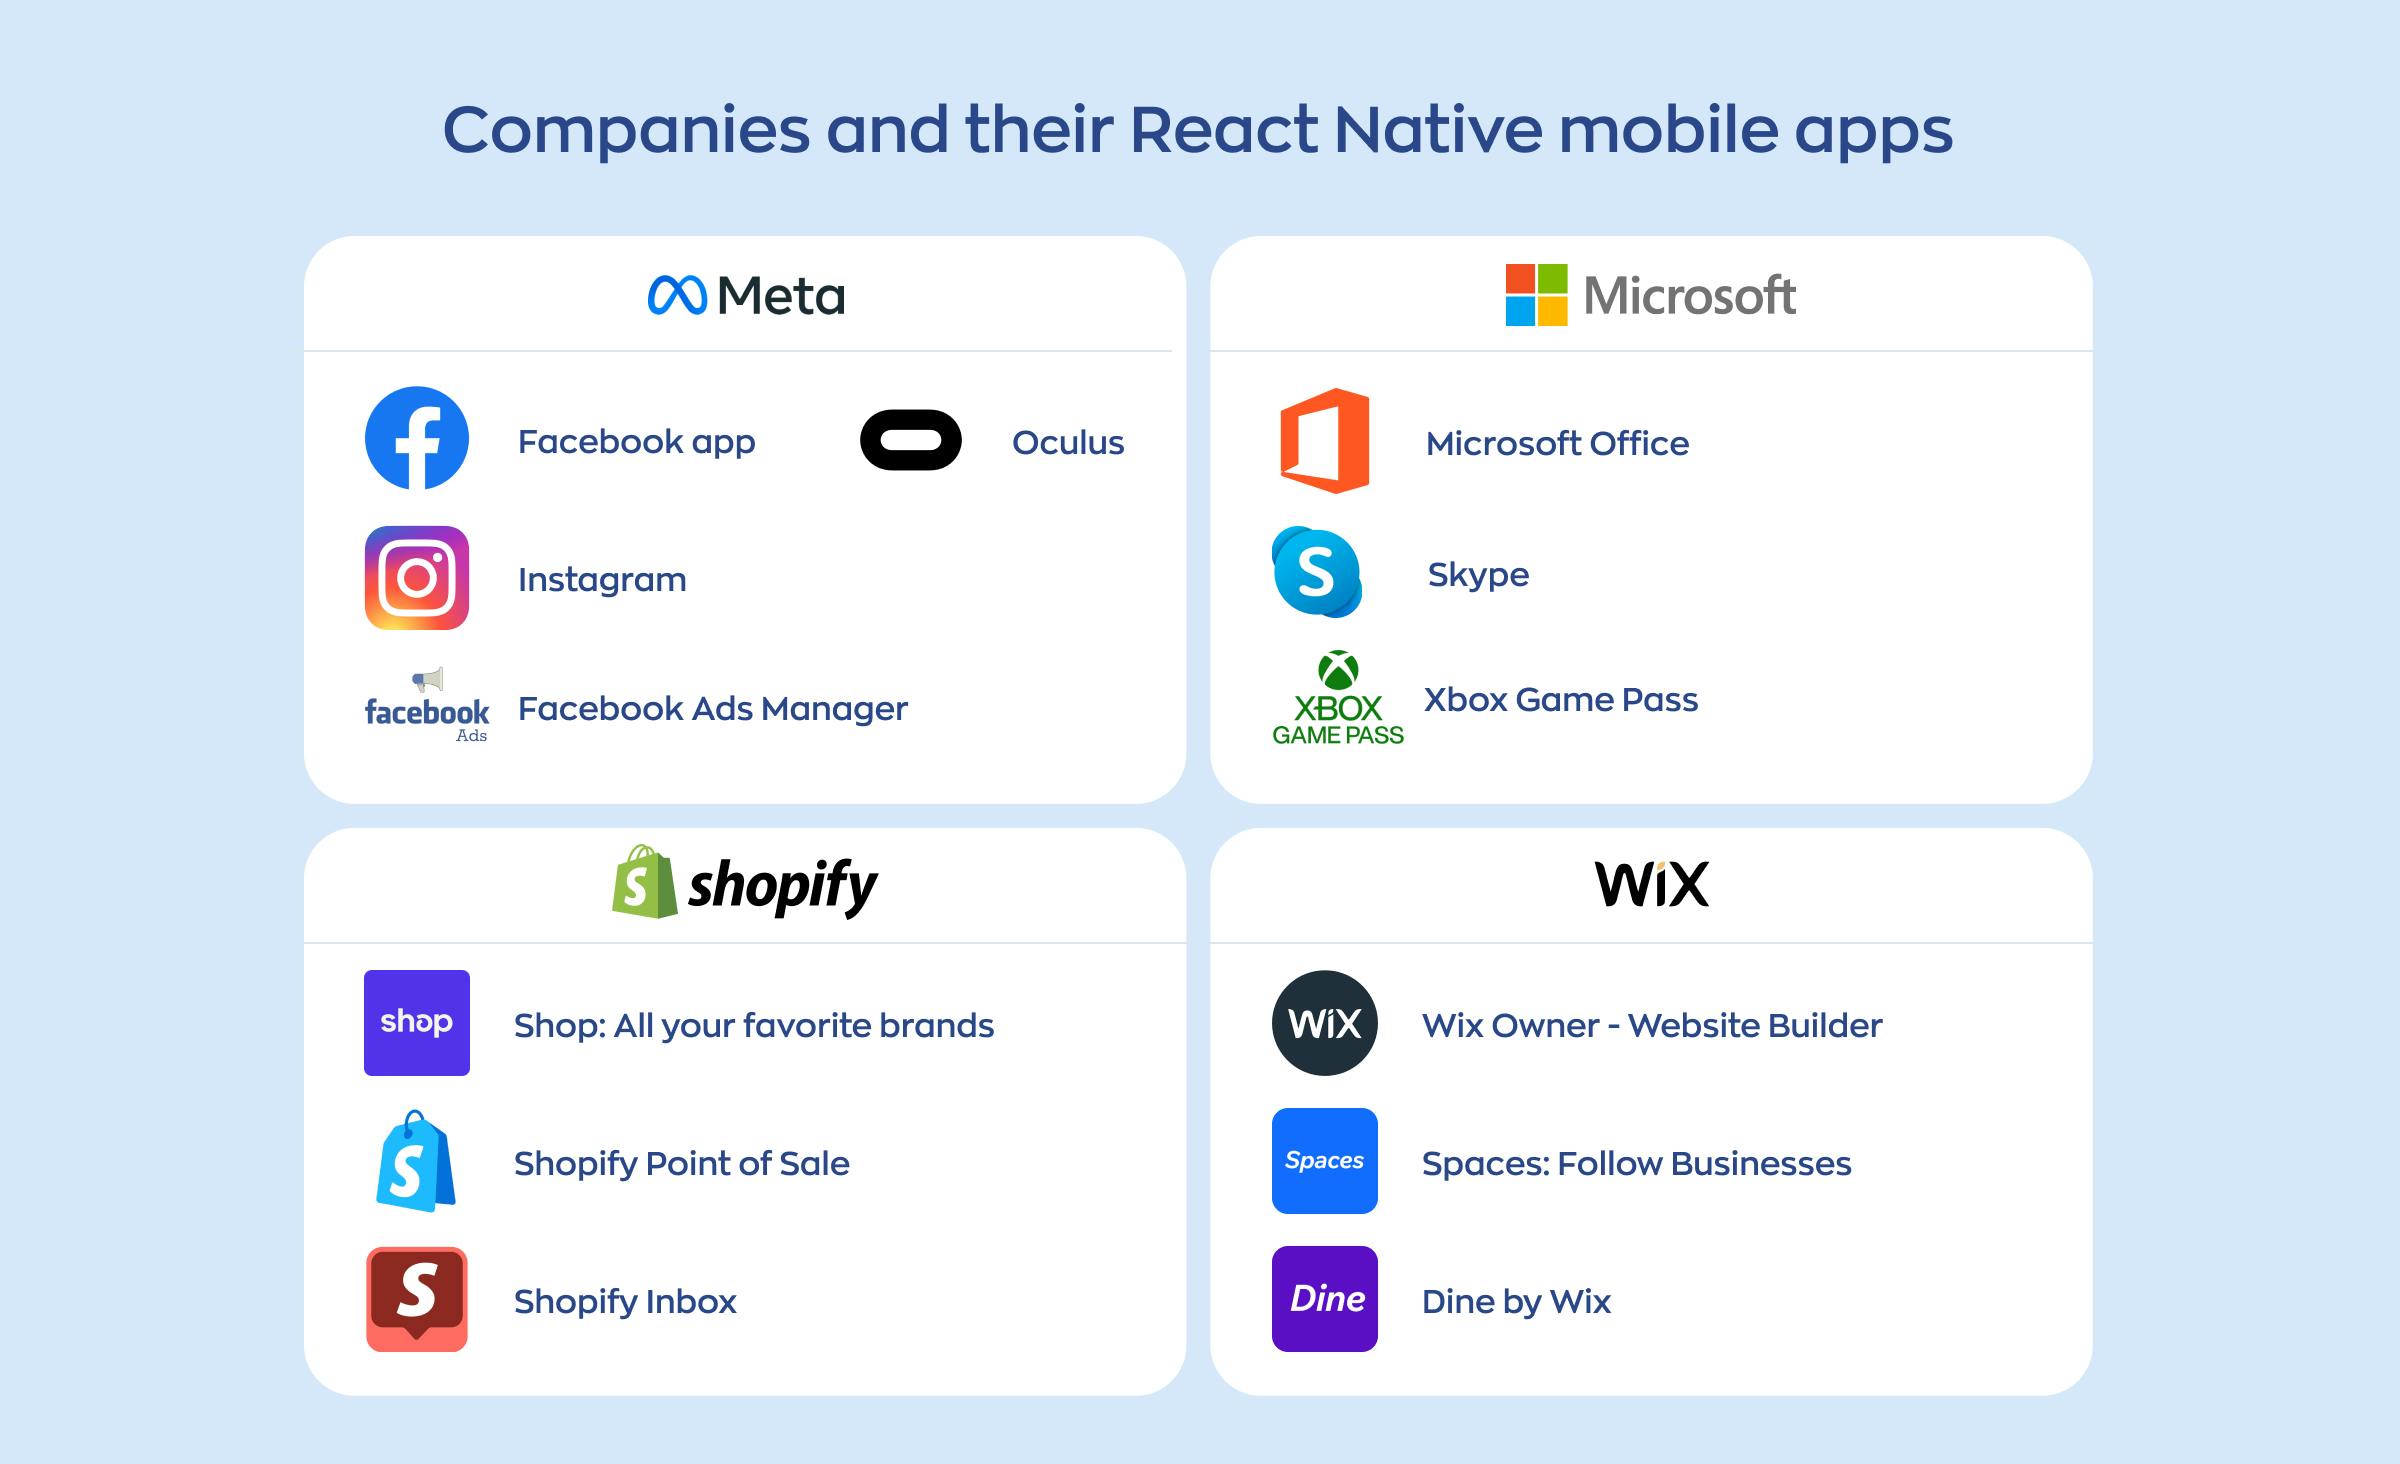 The list of world-known companies that choose React Native for app development